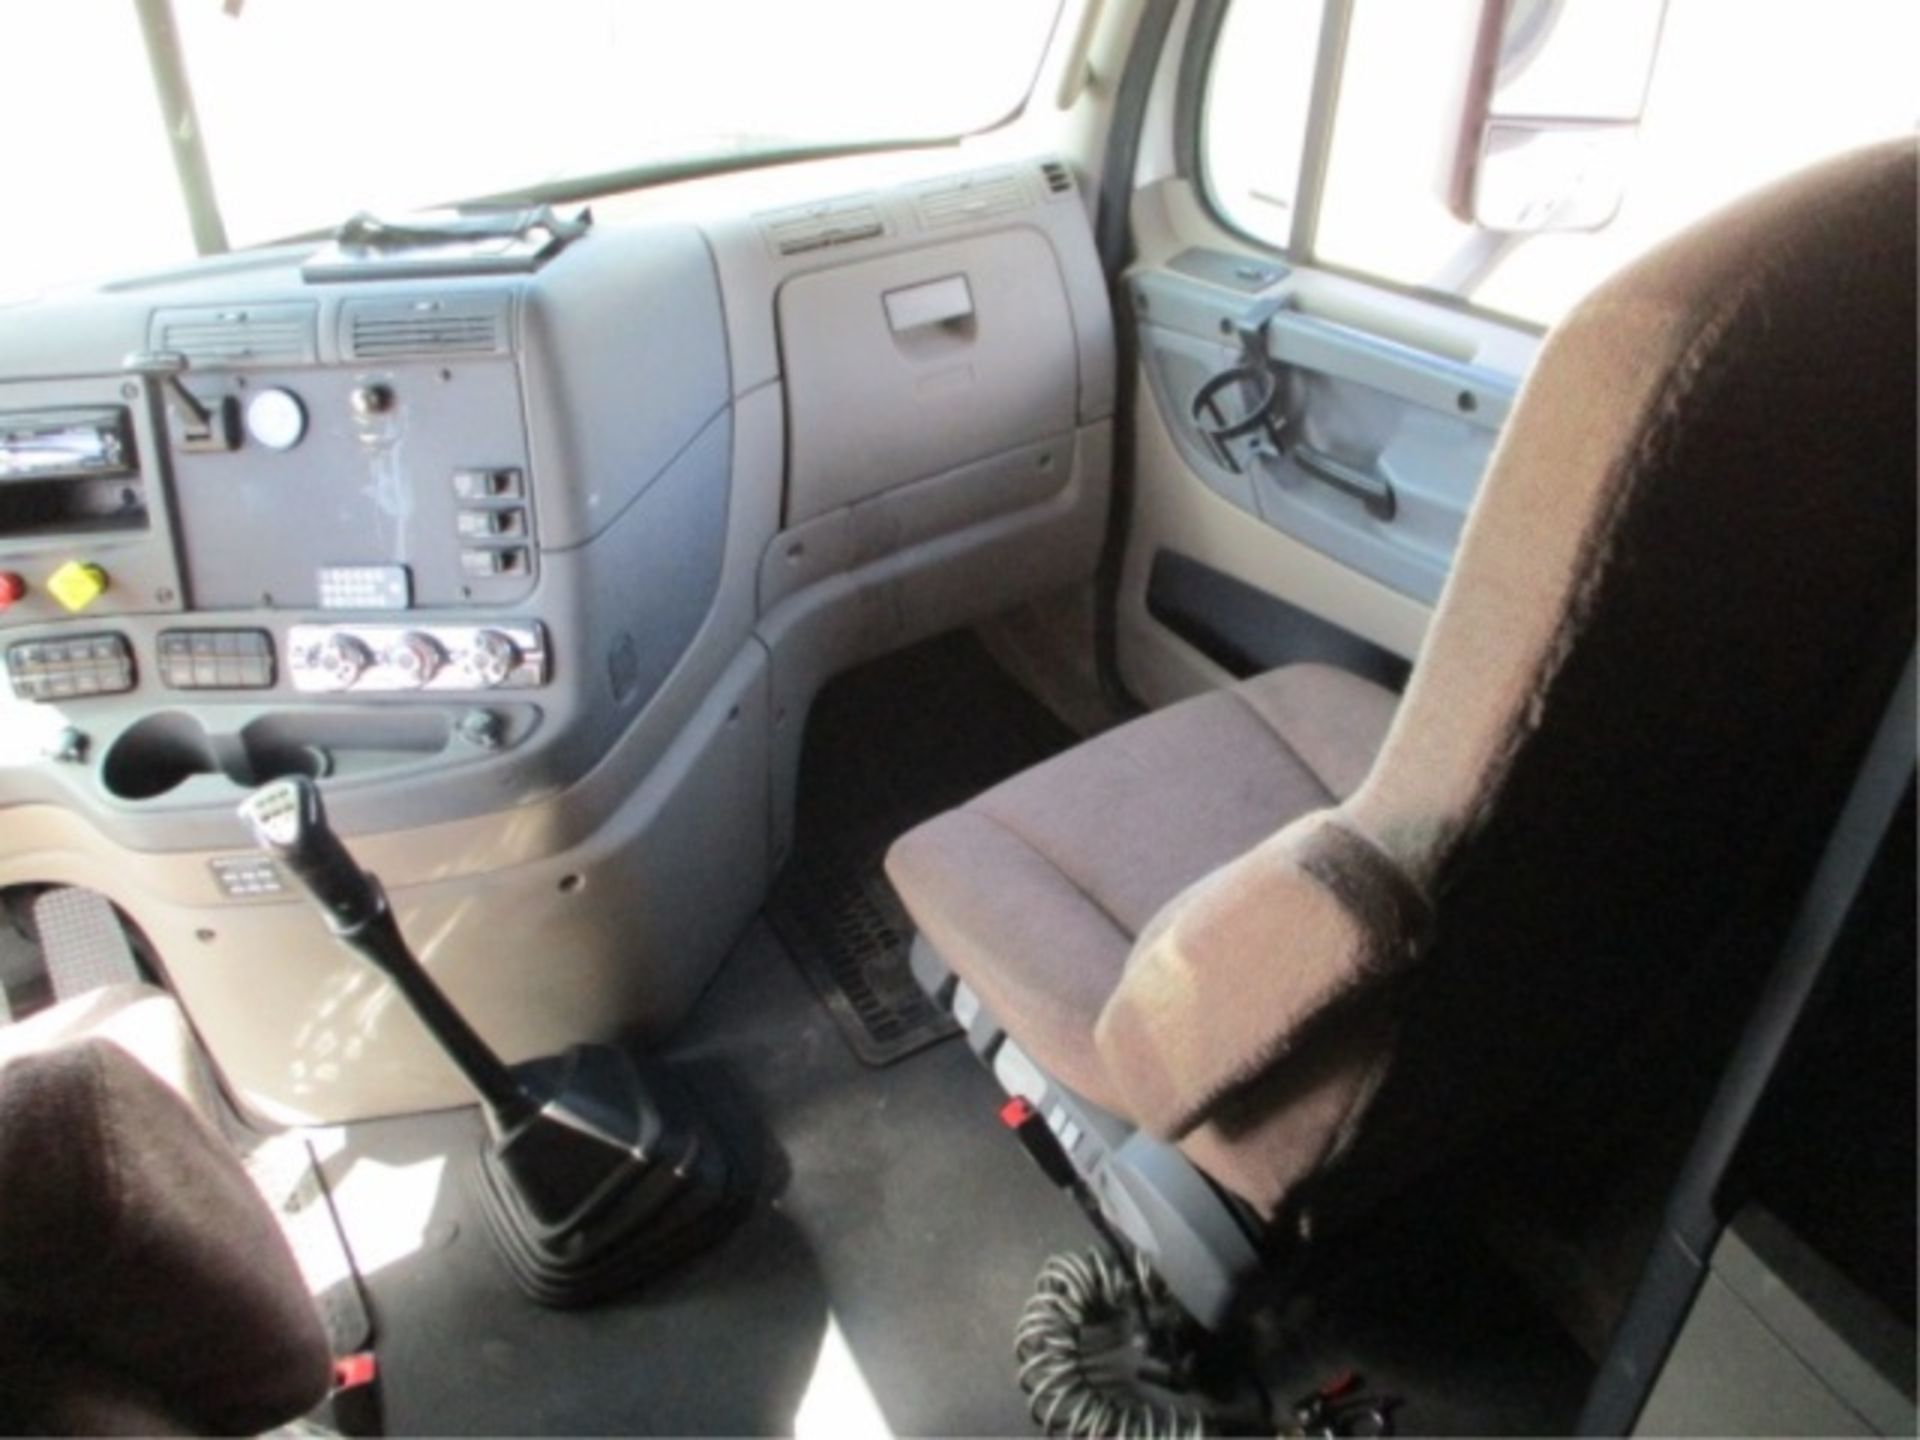 2015 Freightliner Cascadia T/A Truck Tractor, Detroit 6-Cyl Diesel, Eaton Fuller 10-Speed, 60" - Image 39 of 72